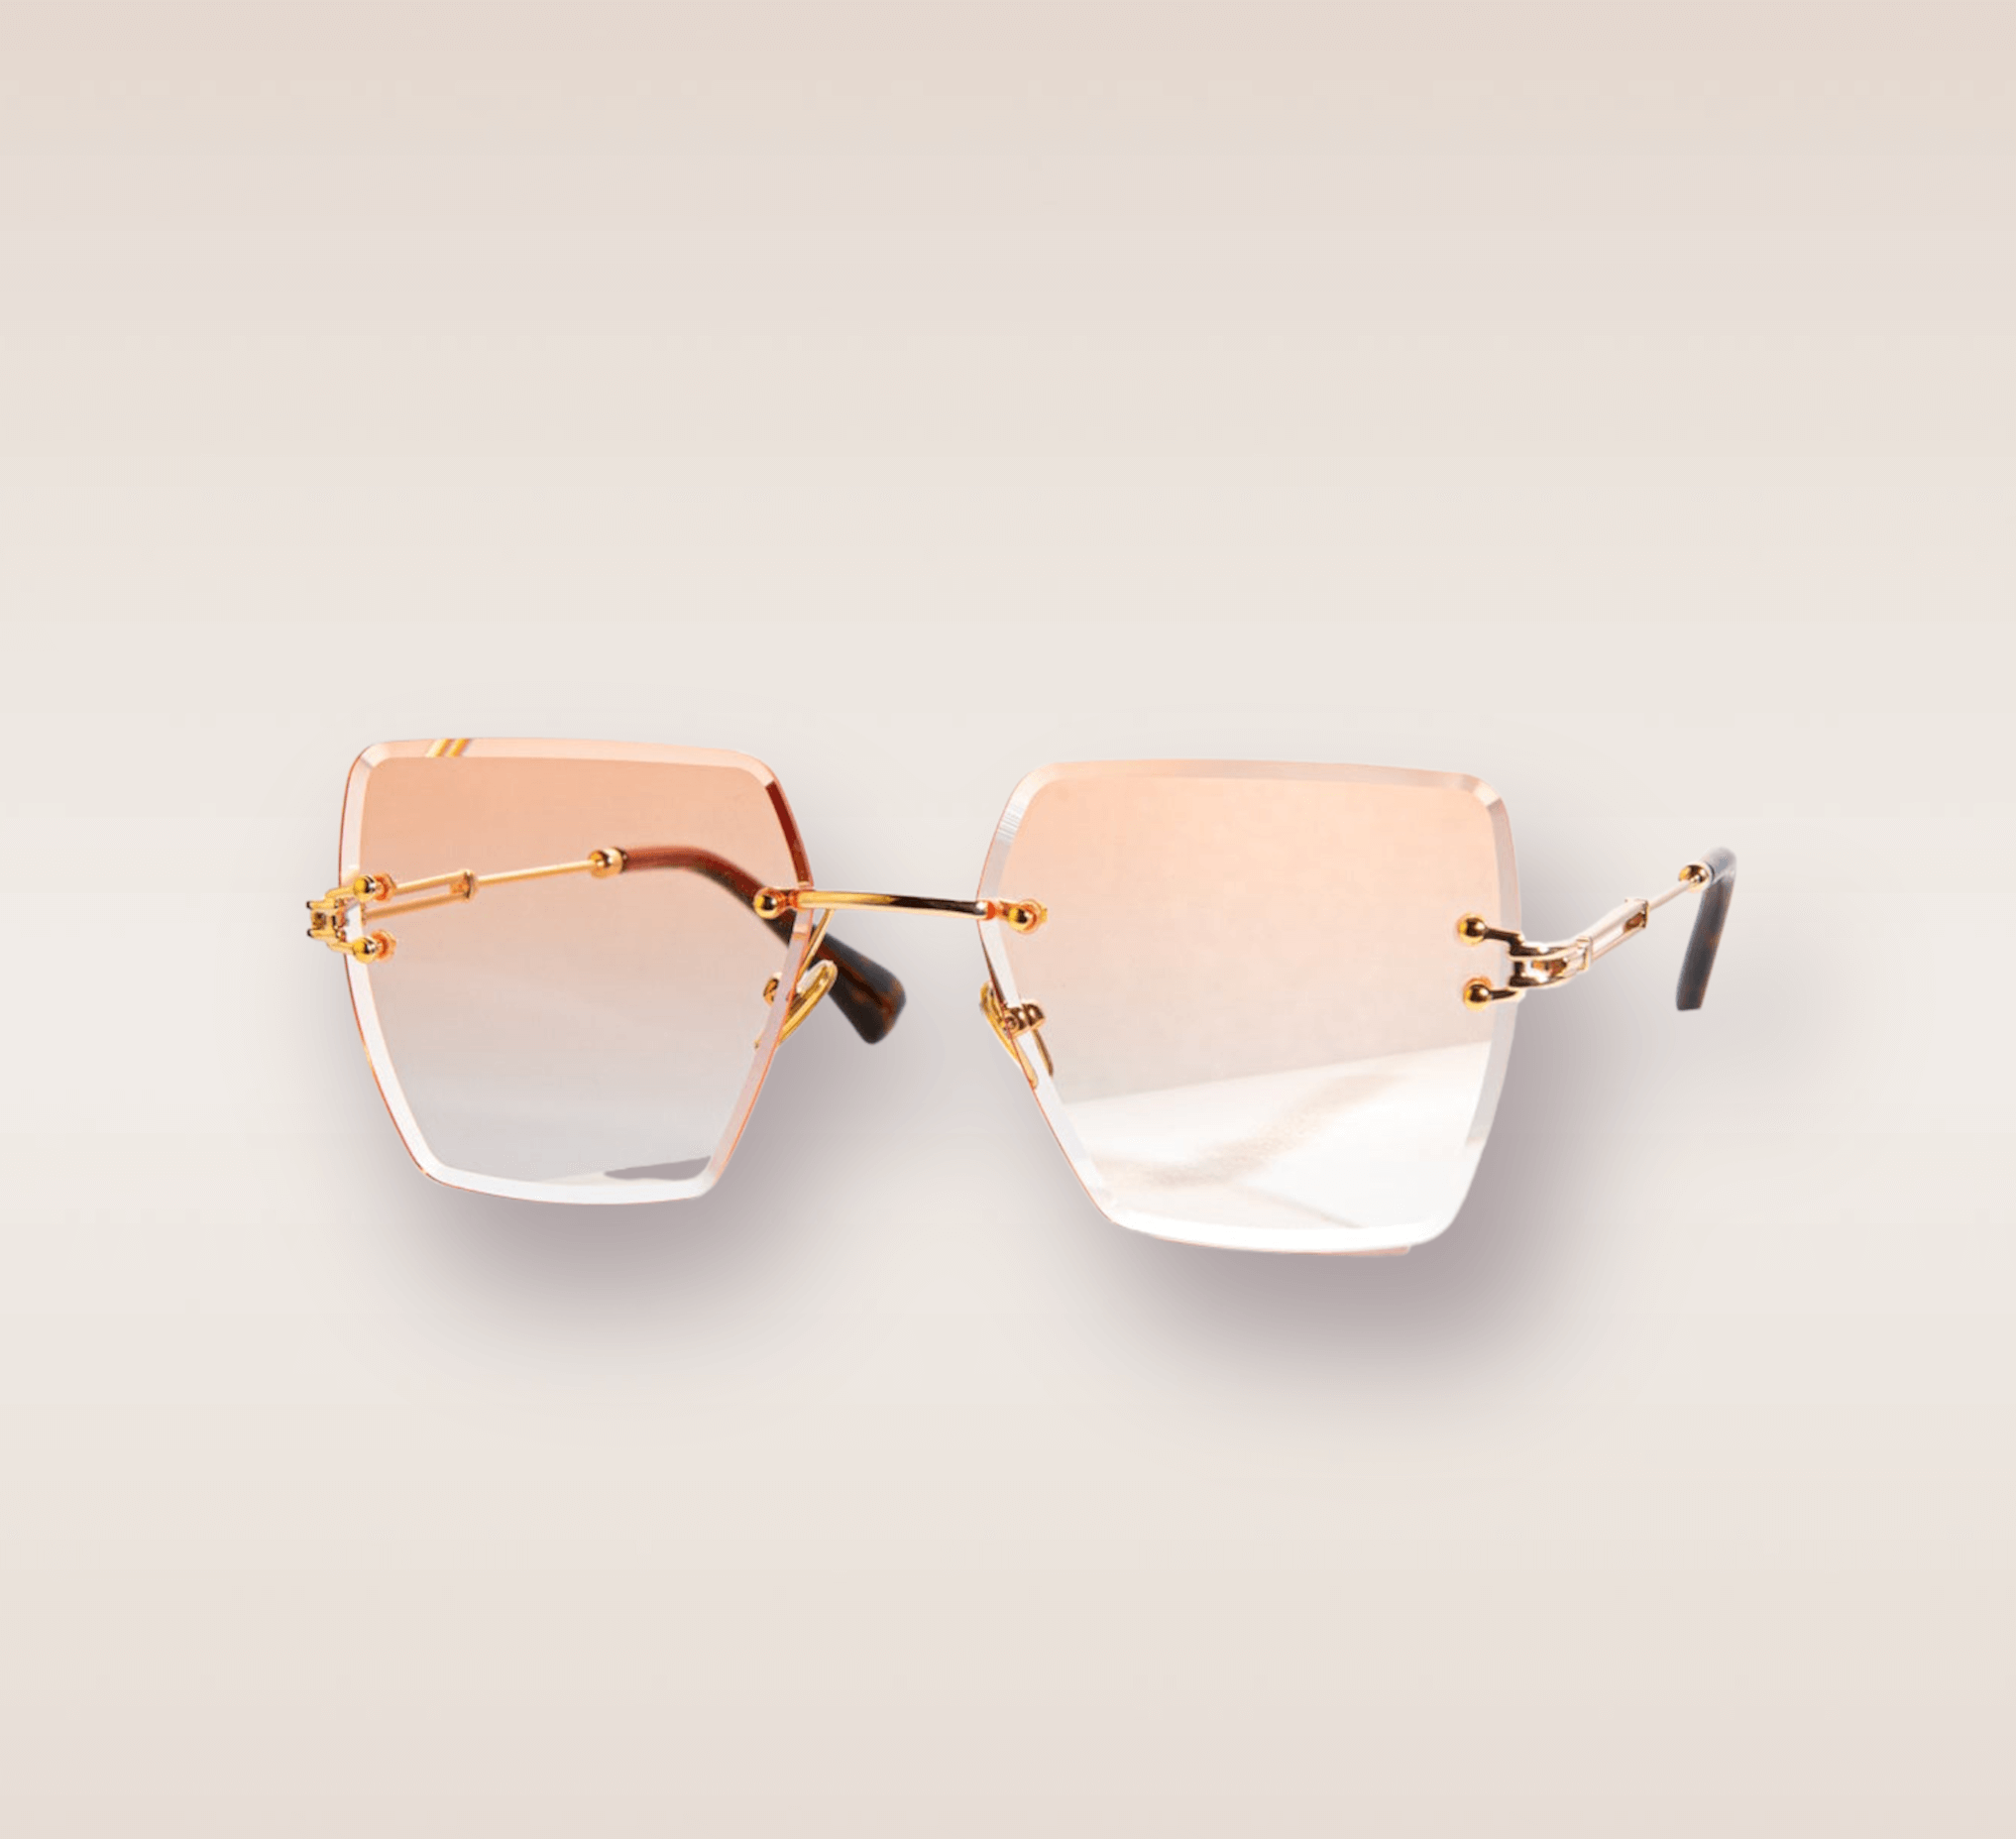 In this up-close shot, we are introduced to the captivating Salmon frames, a stylish and sophisticated eyewear option. The rimless frames feature a mesmerizing peach gradient hue. The gold arms add a touch of opulence and refinement, complimenting the peach tones with a warm metallic accent. These frames are a true fashion statement, combining modern design with a touch of luxury. 